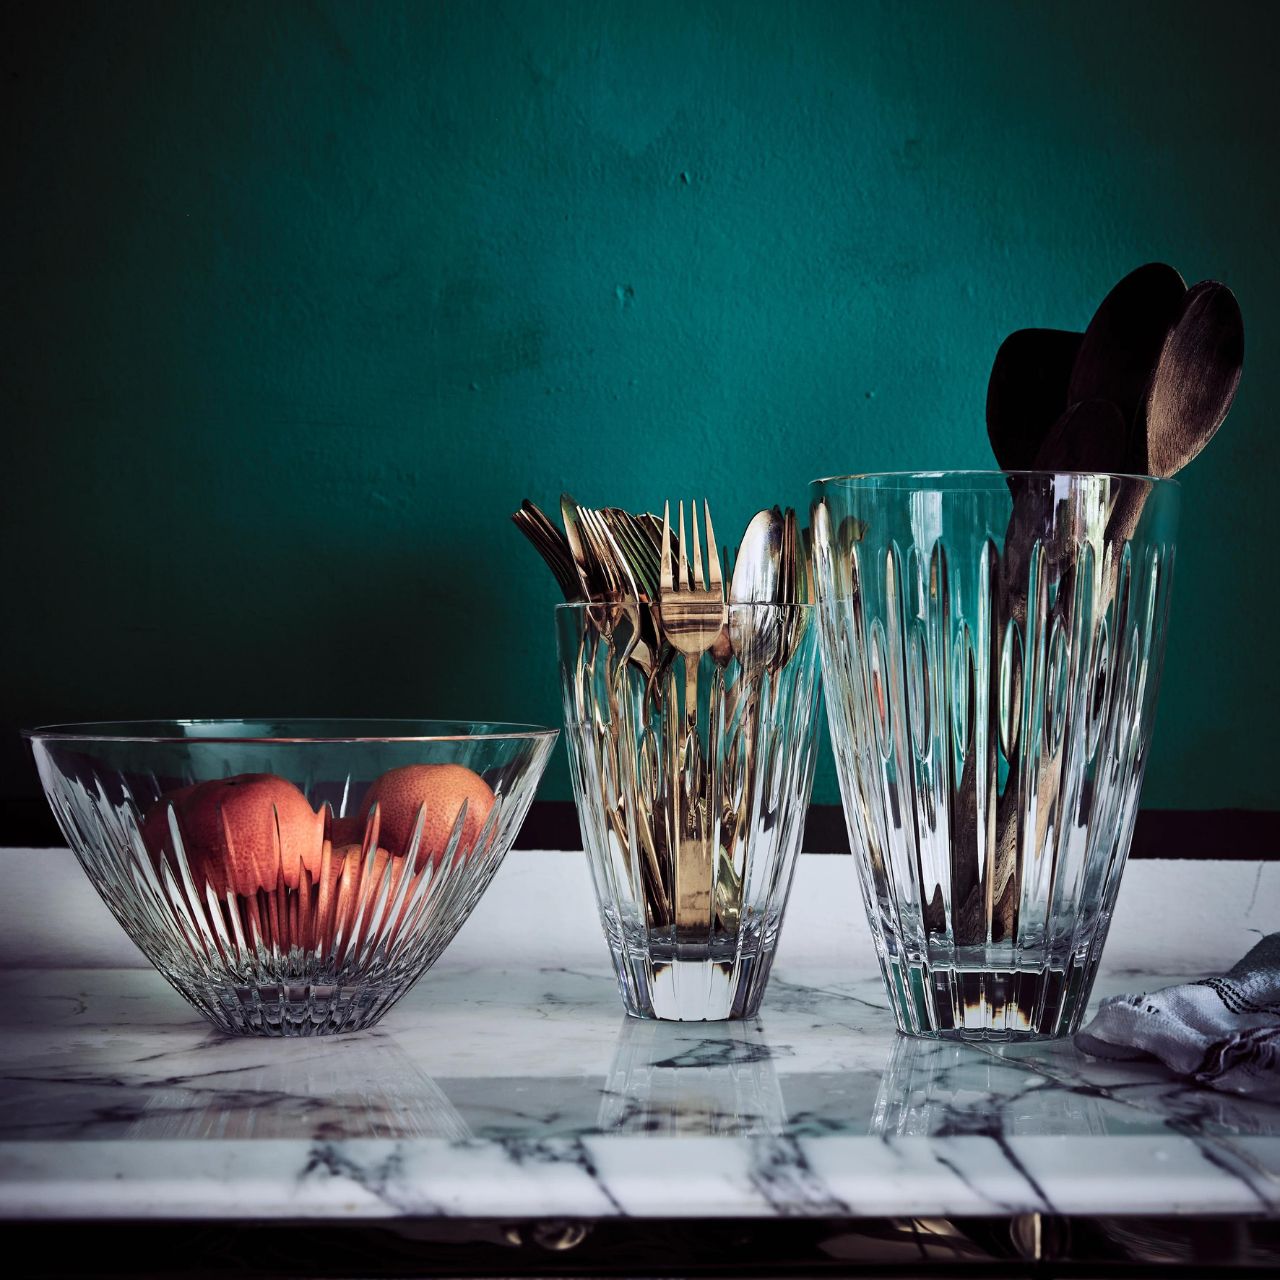 Waterford Ardan Mara 9″ Bowl  Waterford Crystal offers the beauty of simplicity with the Mara bowl. Mara is the Irish meaning for sea and is inspired by the wild Atlantic Ocean with long and short deep vertical cuts.